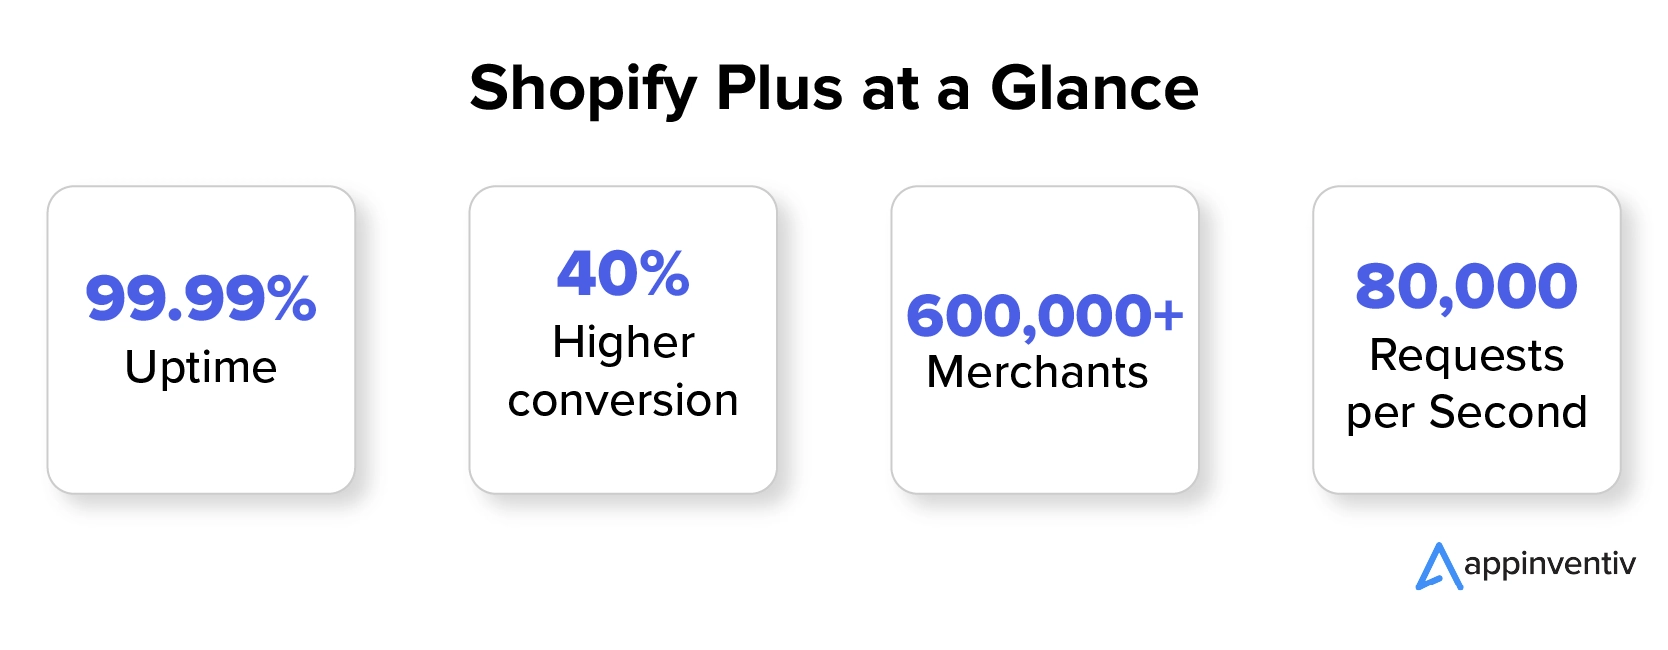 Shopify Plus at a Glance